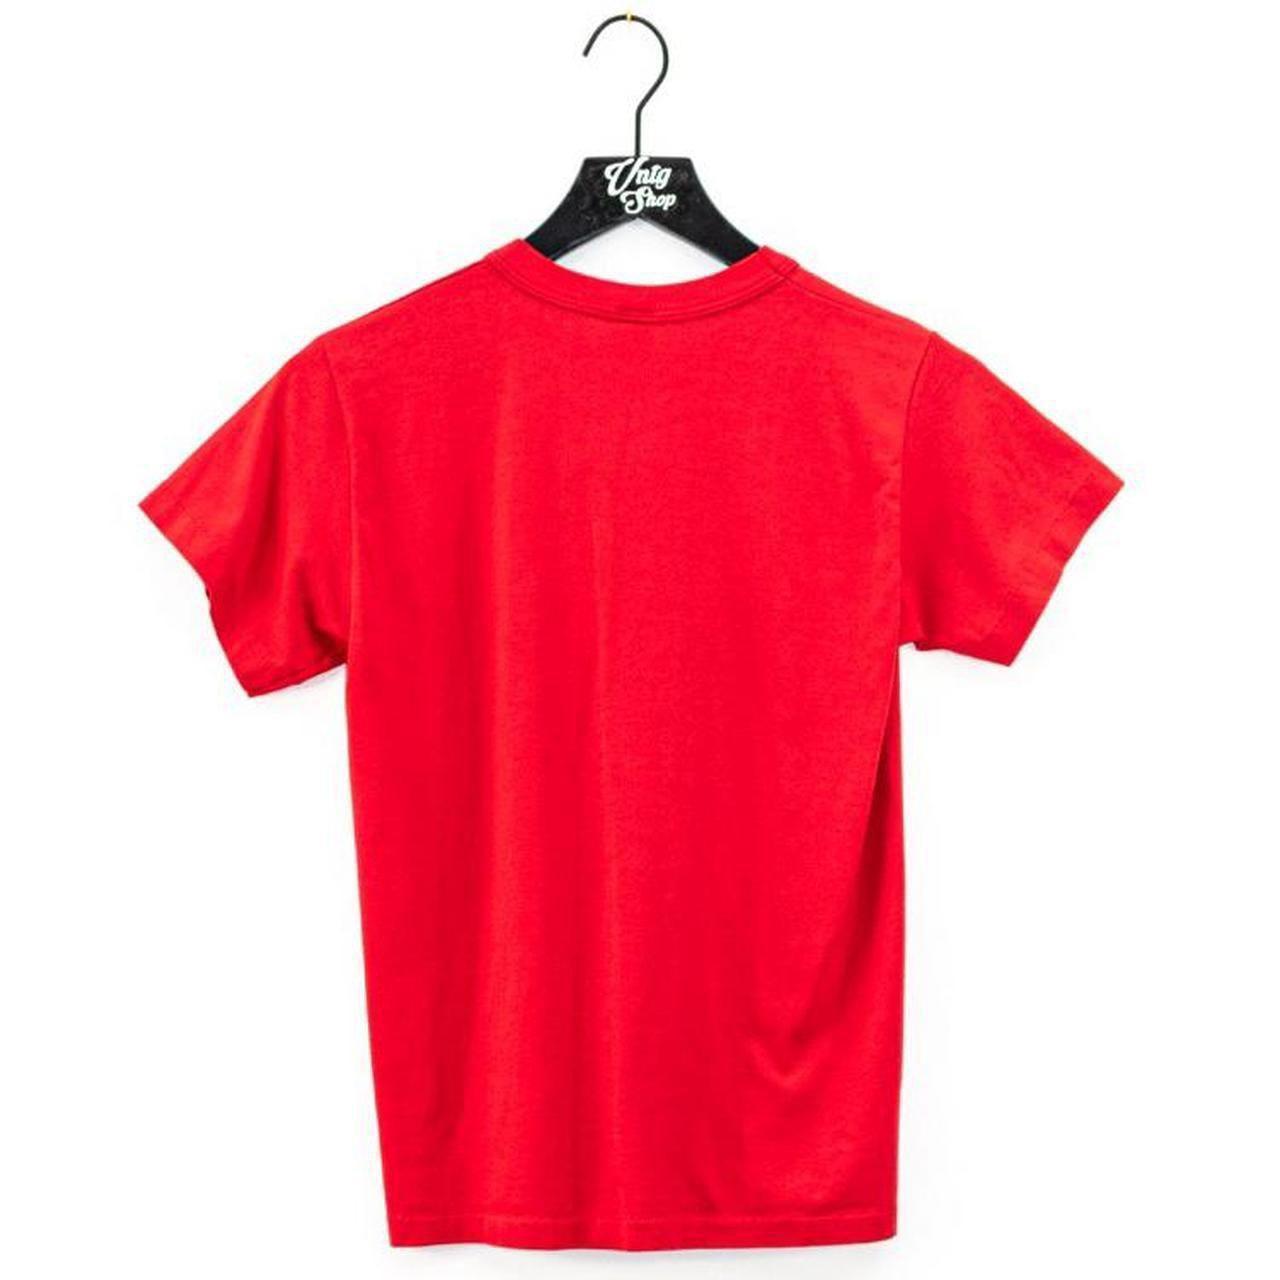 Russell Athletic Men's Red T-shirt (2)